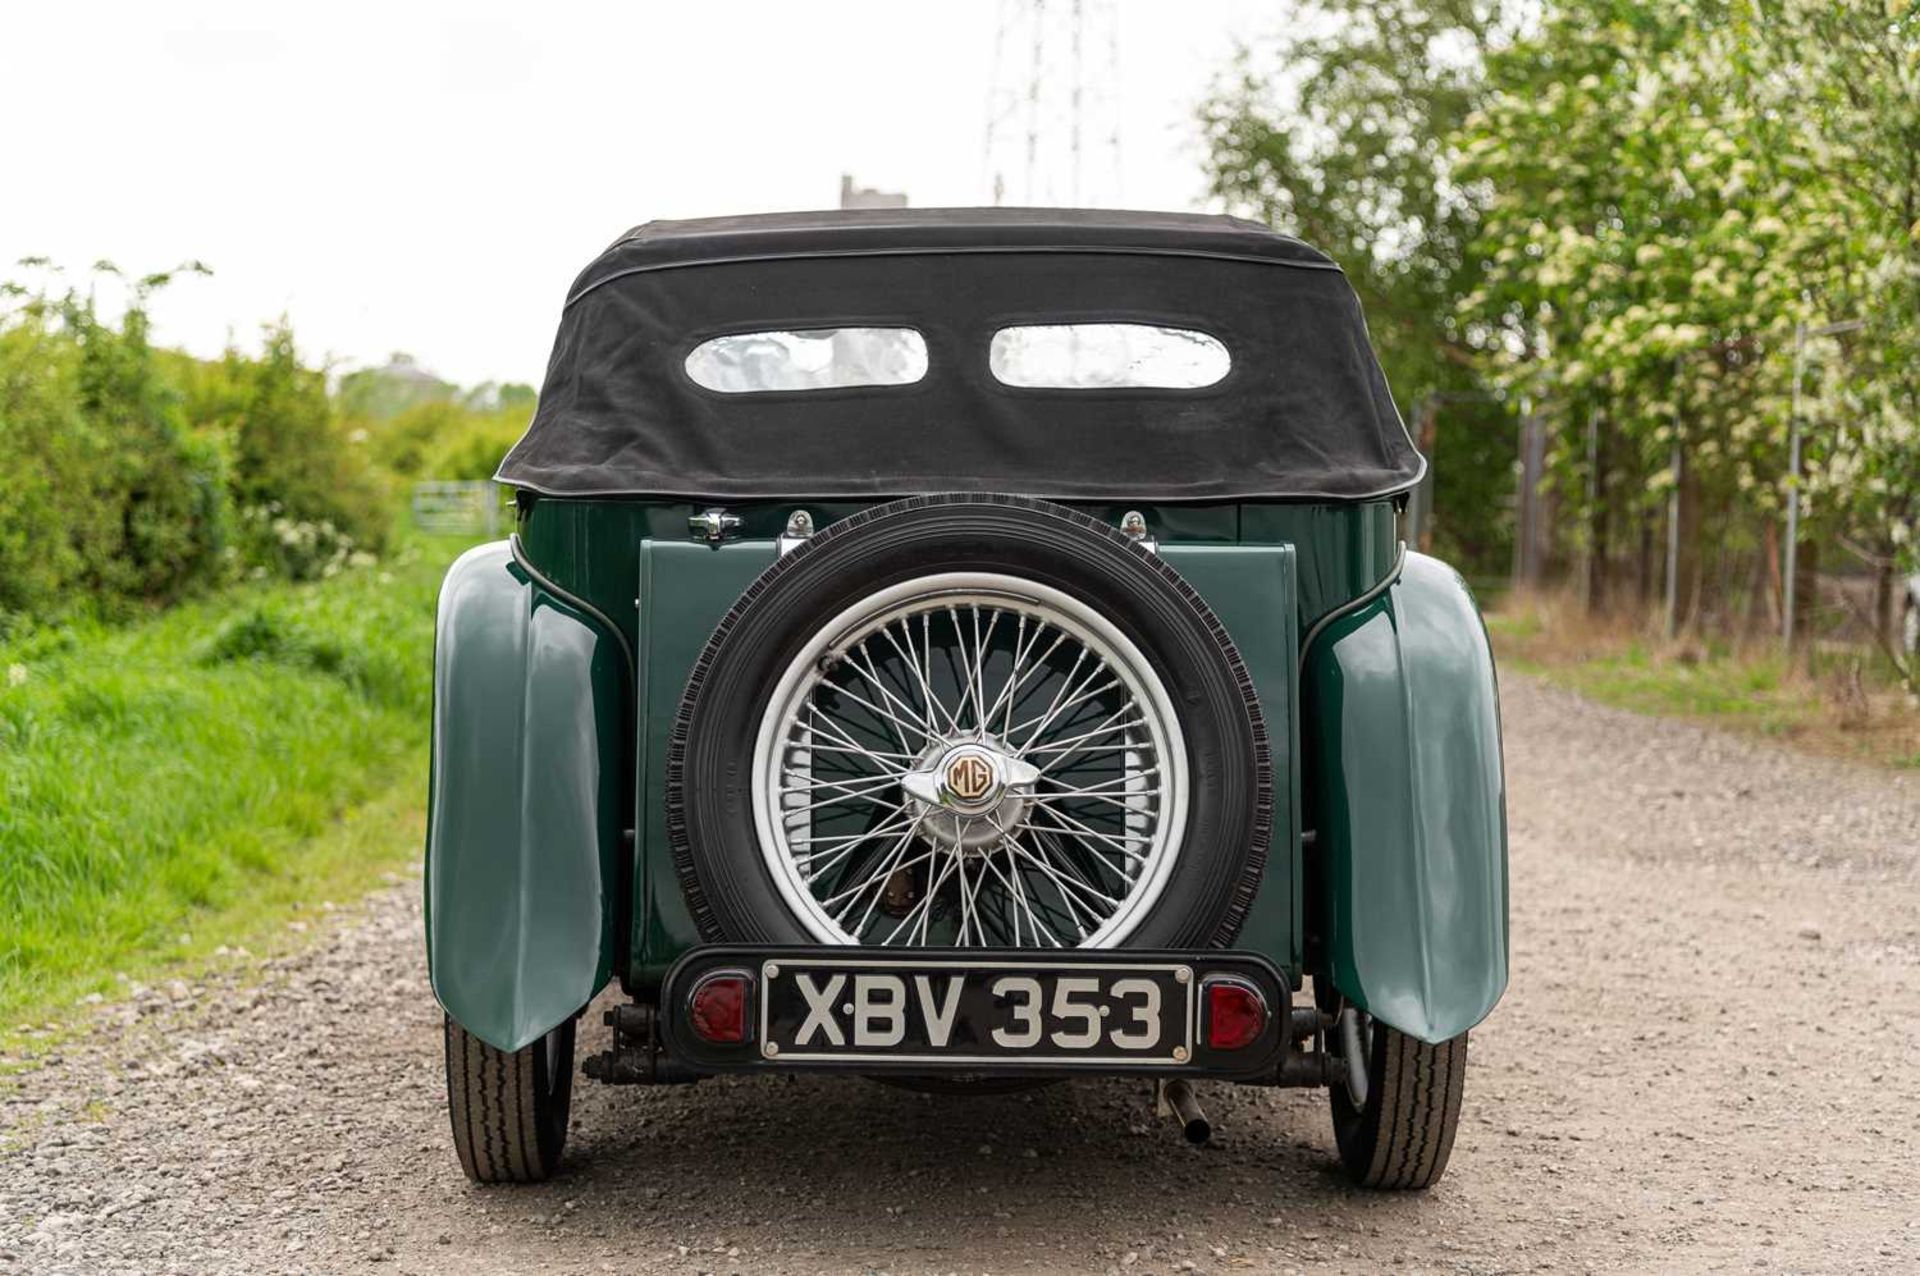 1947 MG TC Midget  Fully restored, right-hand-drive UK home market example - Image 12 of 76